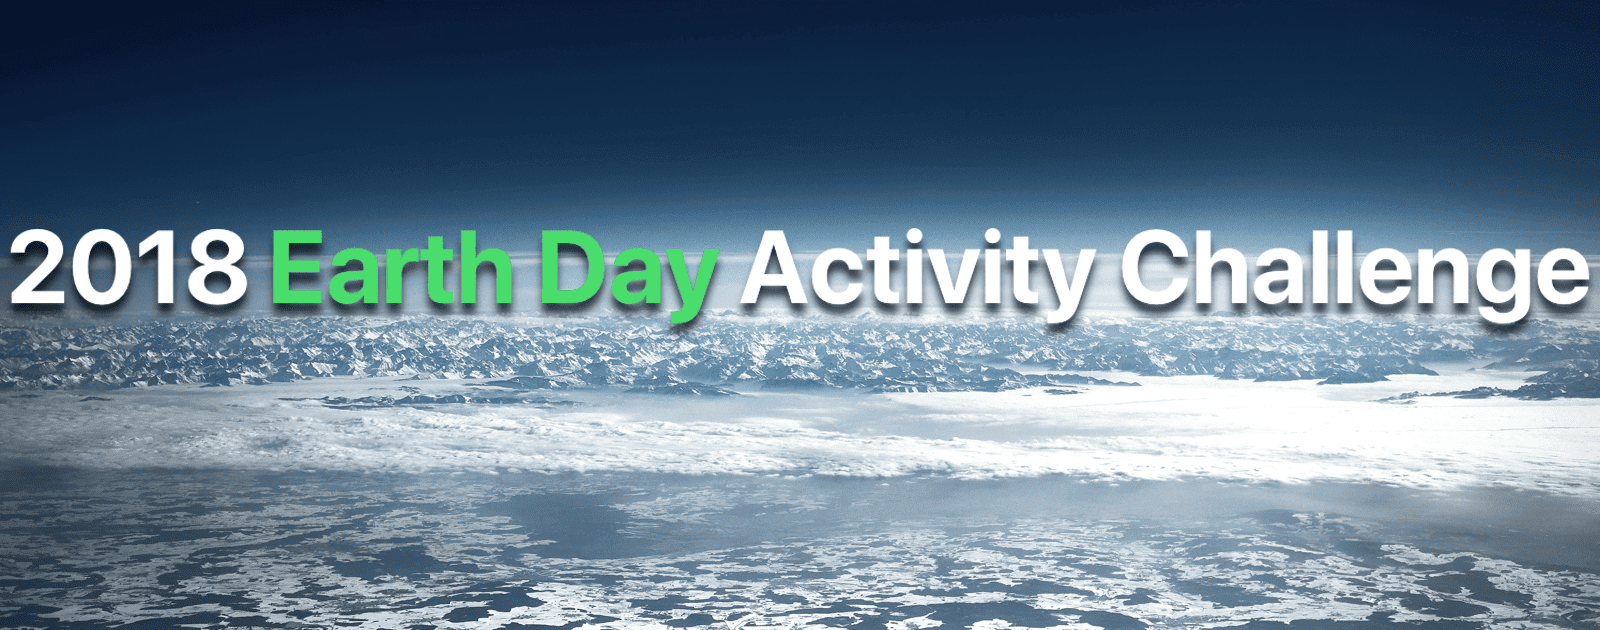 The 2018 Earth Day Activity Challenge for Apple Watch Users is Here